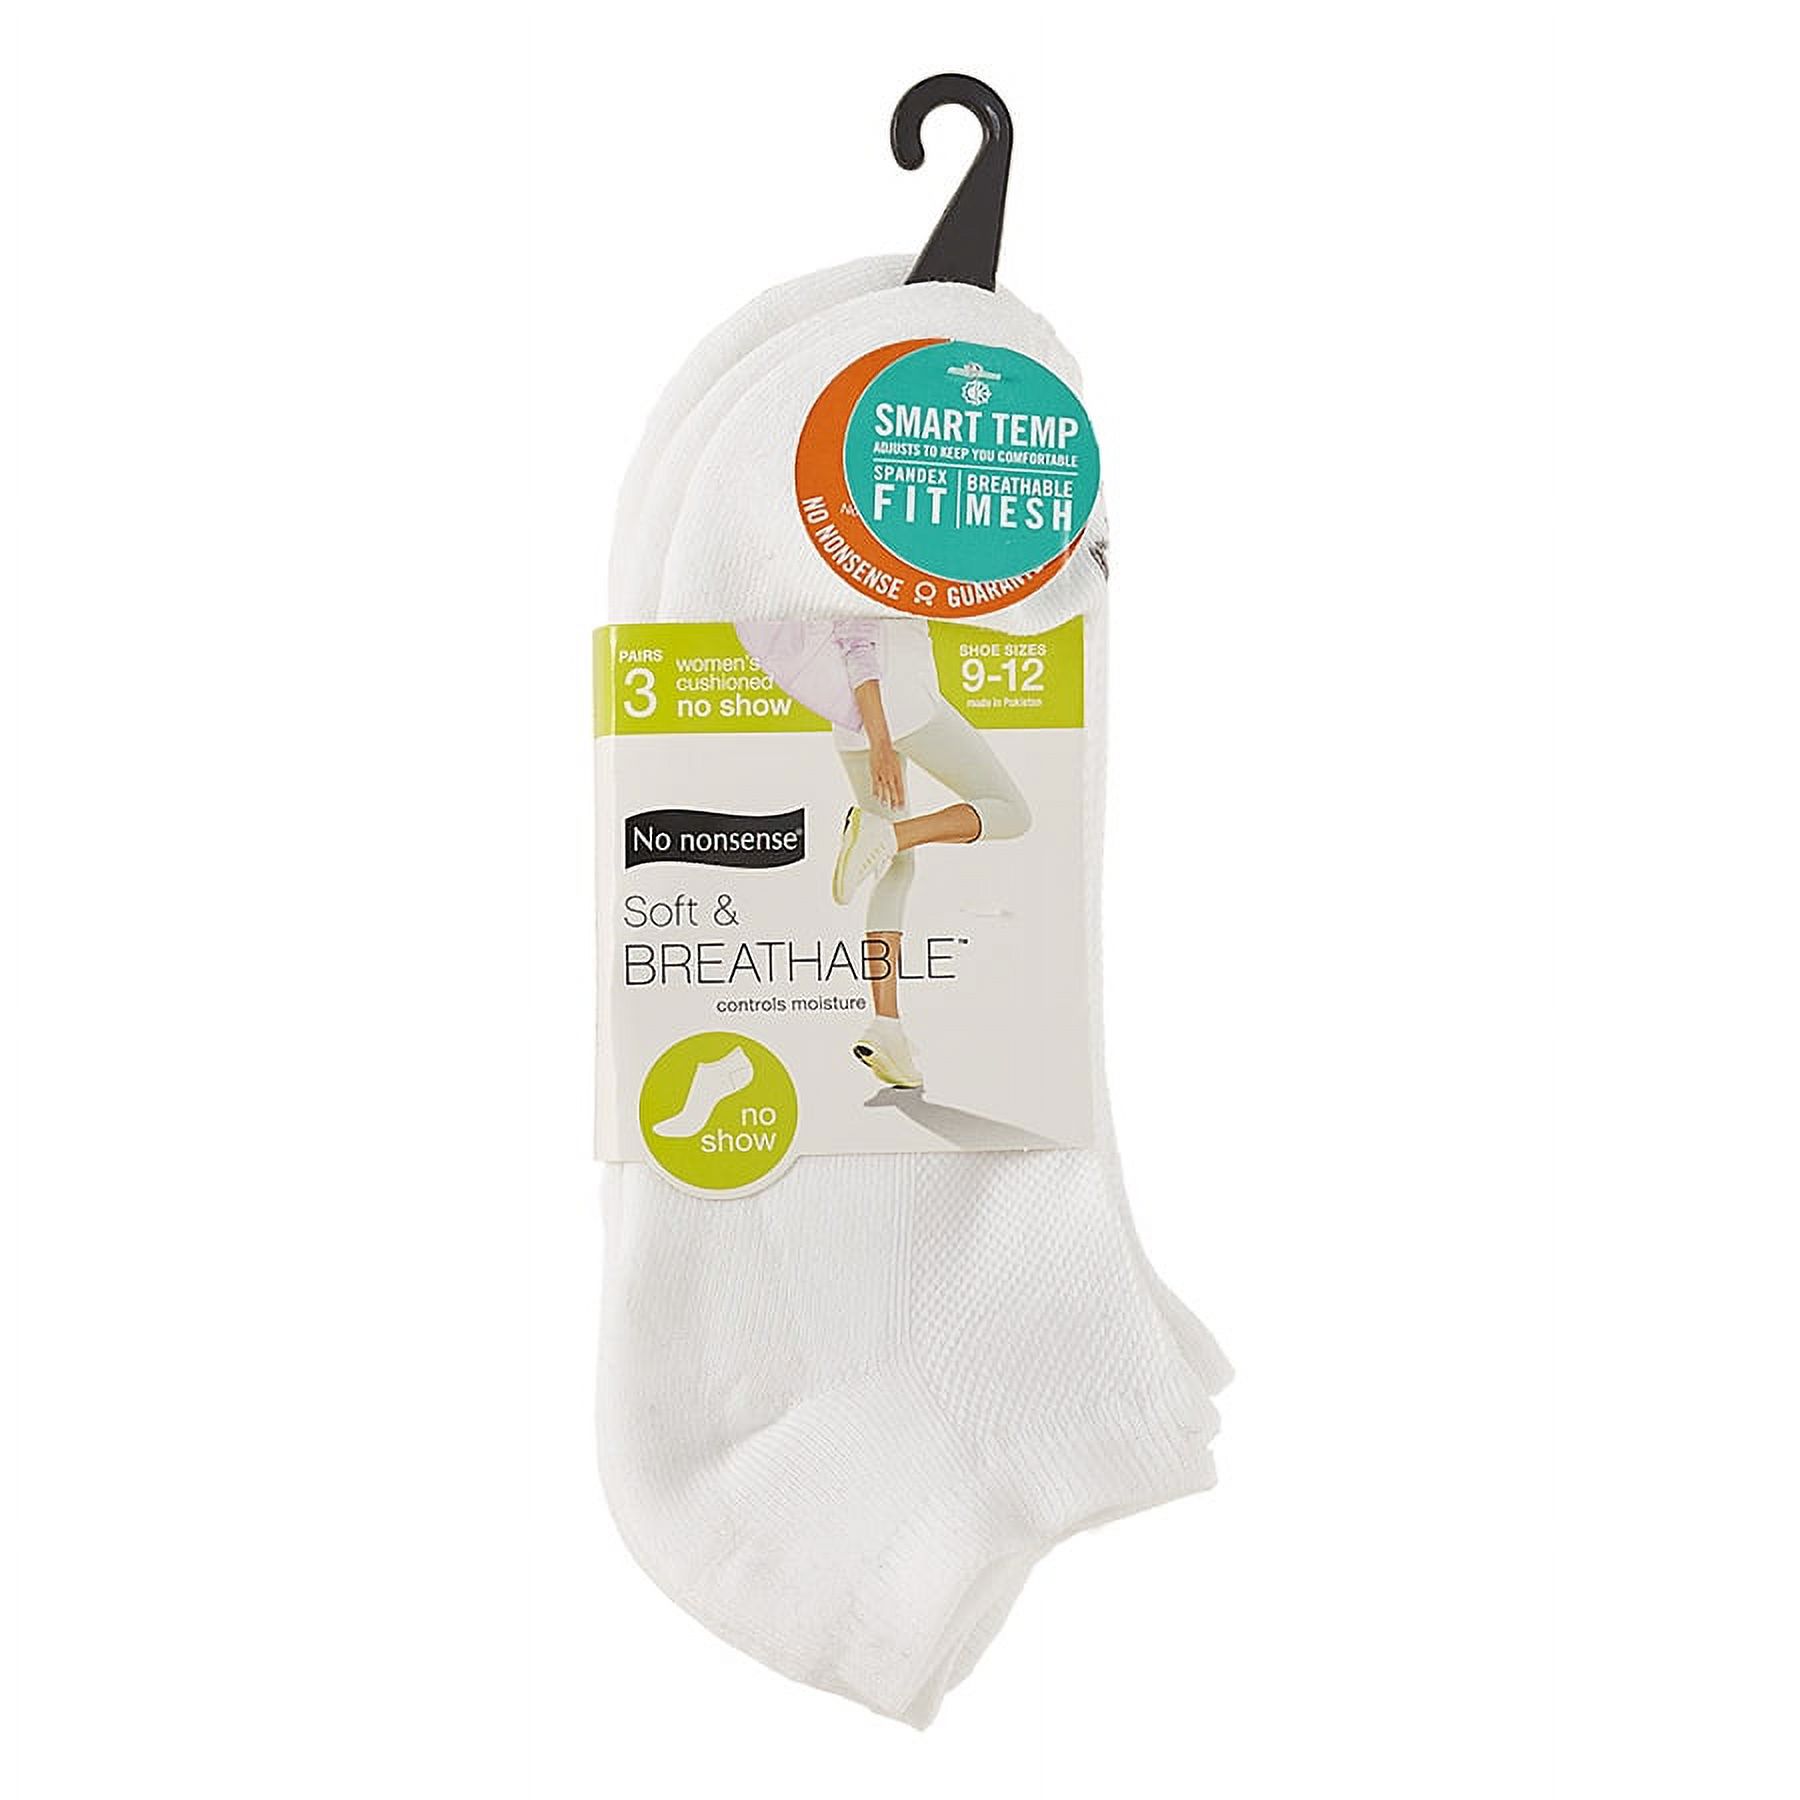 No nonsense Women's Soft & Breathable Half Cushioned Ventilated No Show Socks 3 Pair Pack White 9-12 - image 2 of 2